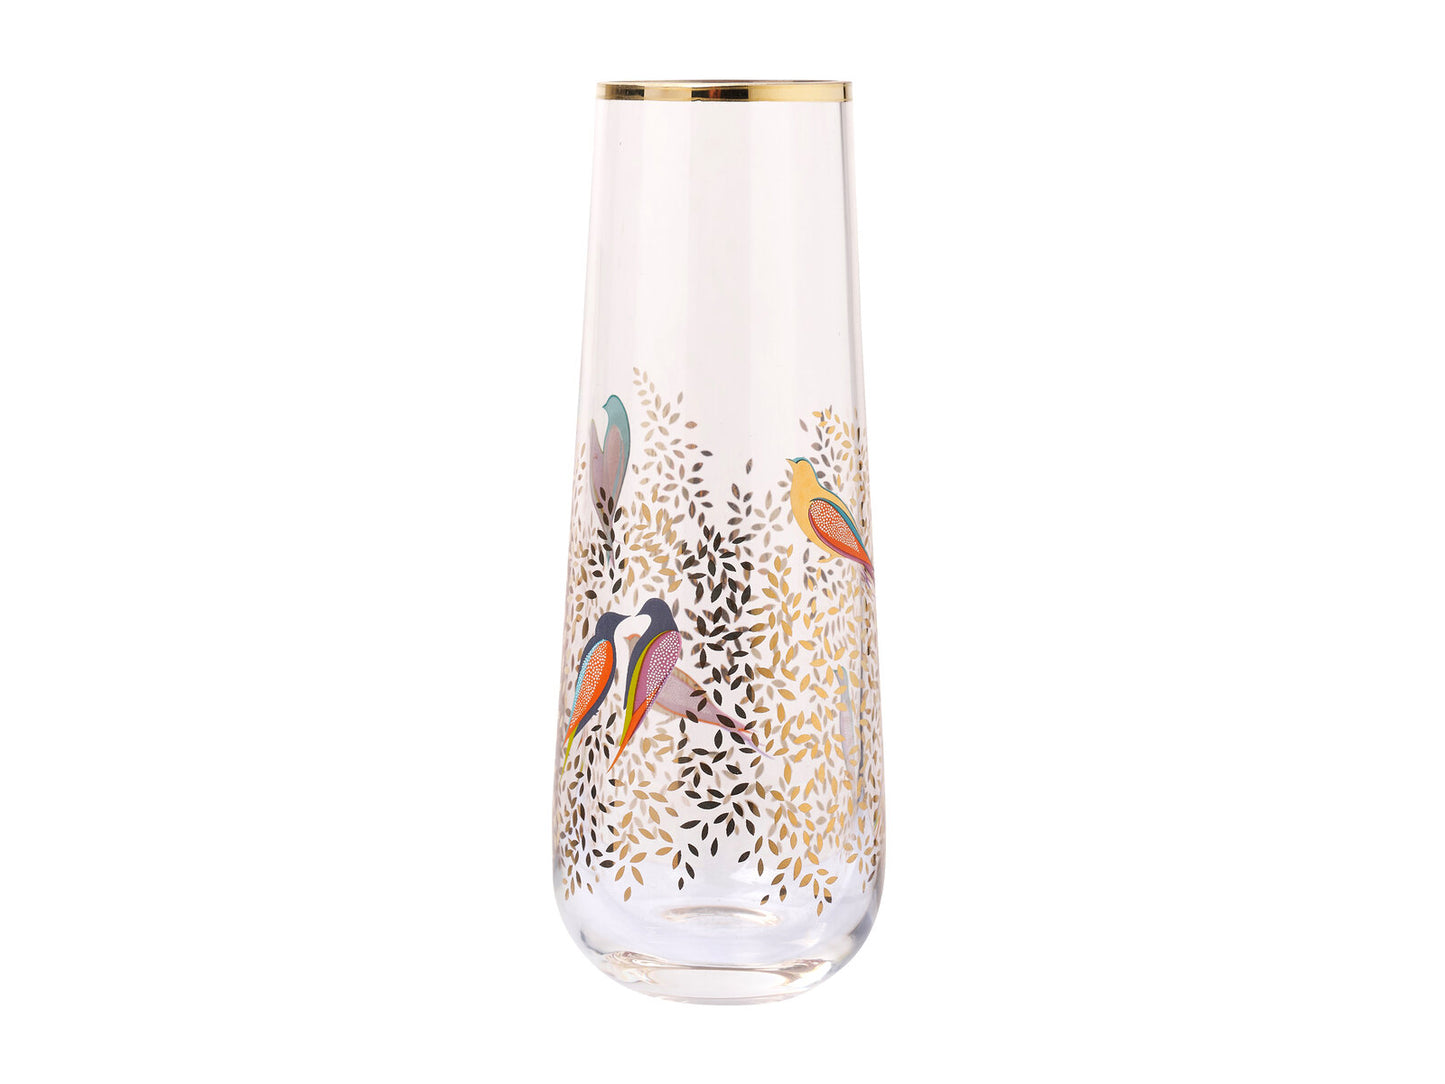 A tapered glass vase with a gold rim and leaves, featuring brightly coloured birds perched amongst the foliage